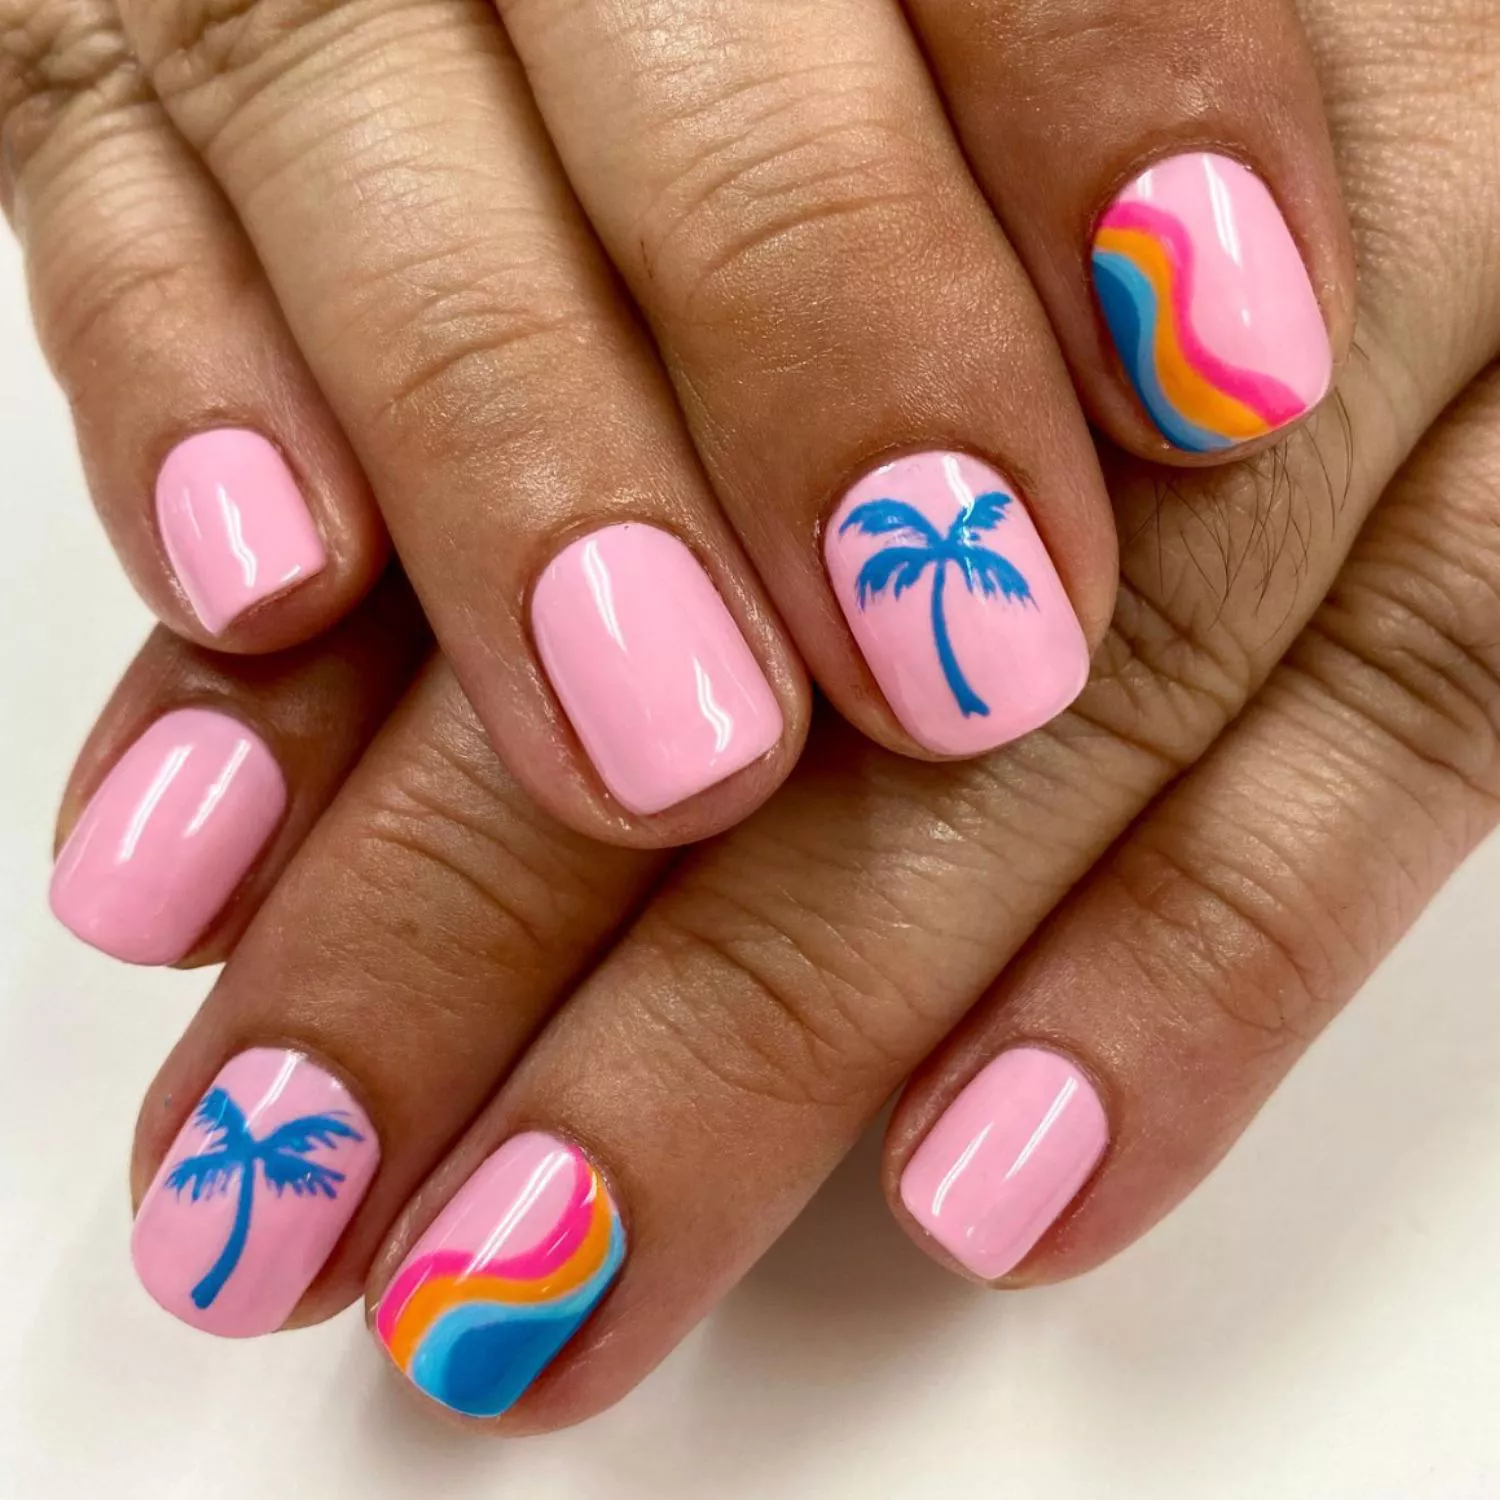 Candy pink manicure with rainbow wave and blue palm tree accent designs